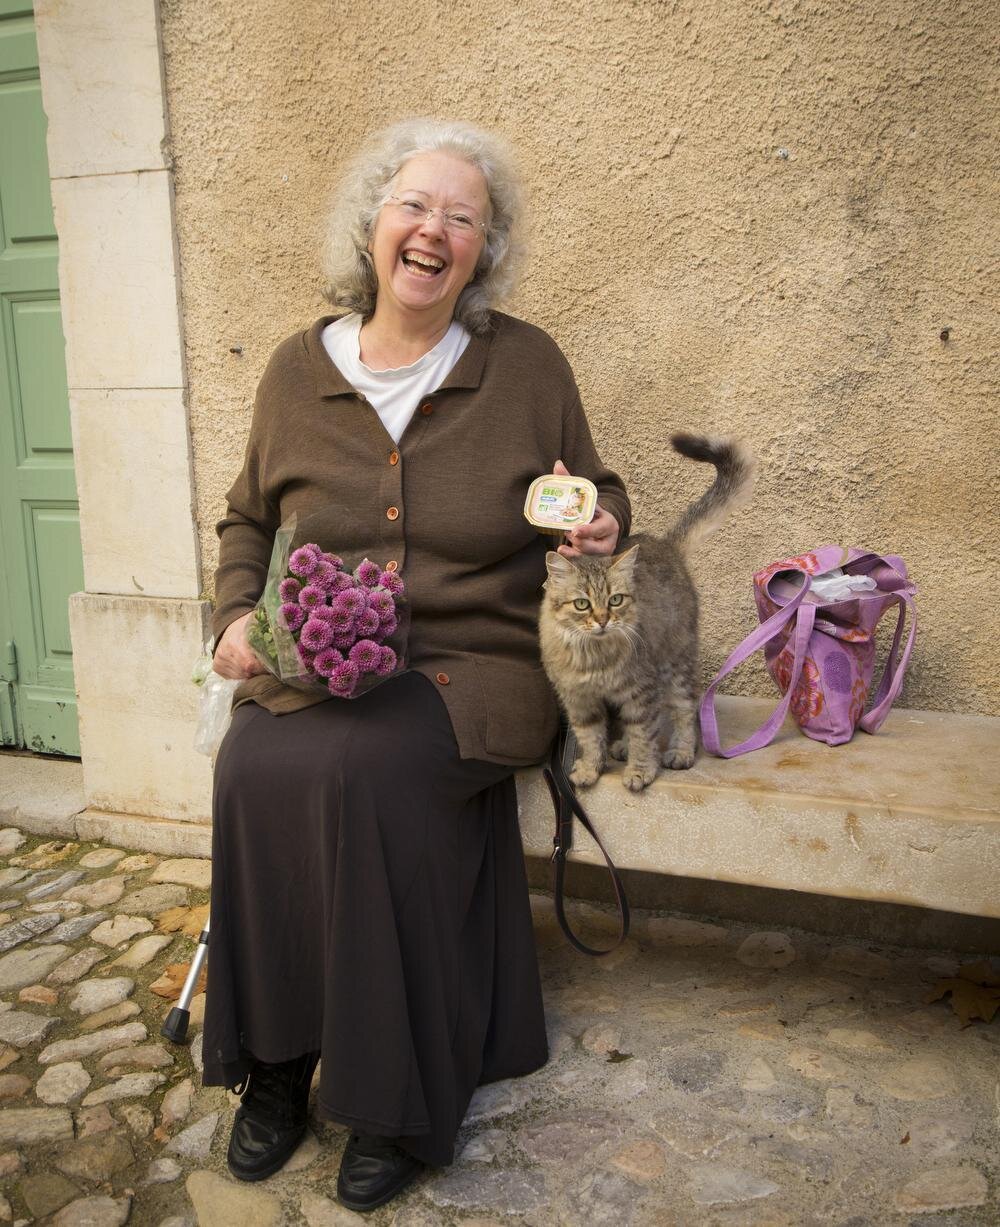 I am finding hidden gems in the outtakes for our book, Un Automne en Pays de Fayence. It's always good to look back through your seconds and thirds to see what jumps out. Here's Eliane Agier being kind to kitties in Seillans. I saw Eliane the other d